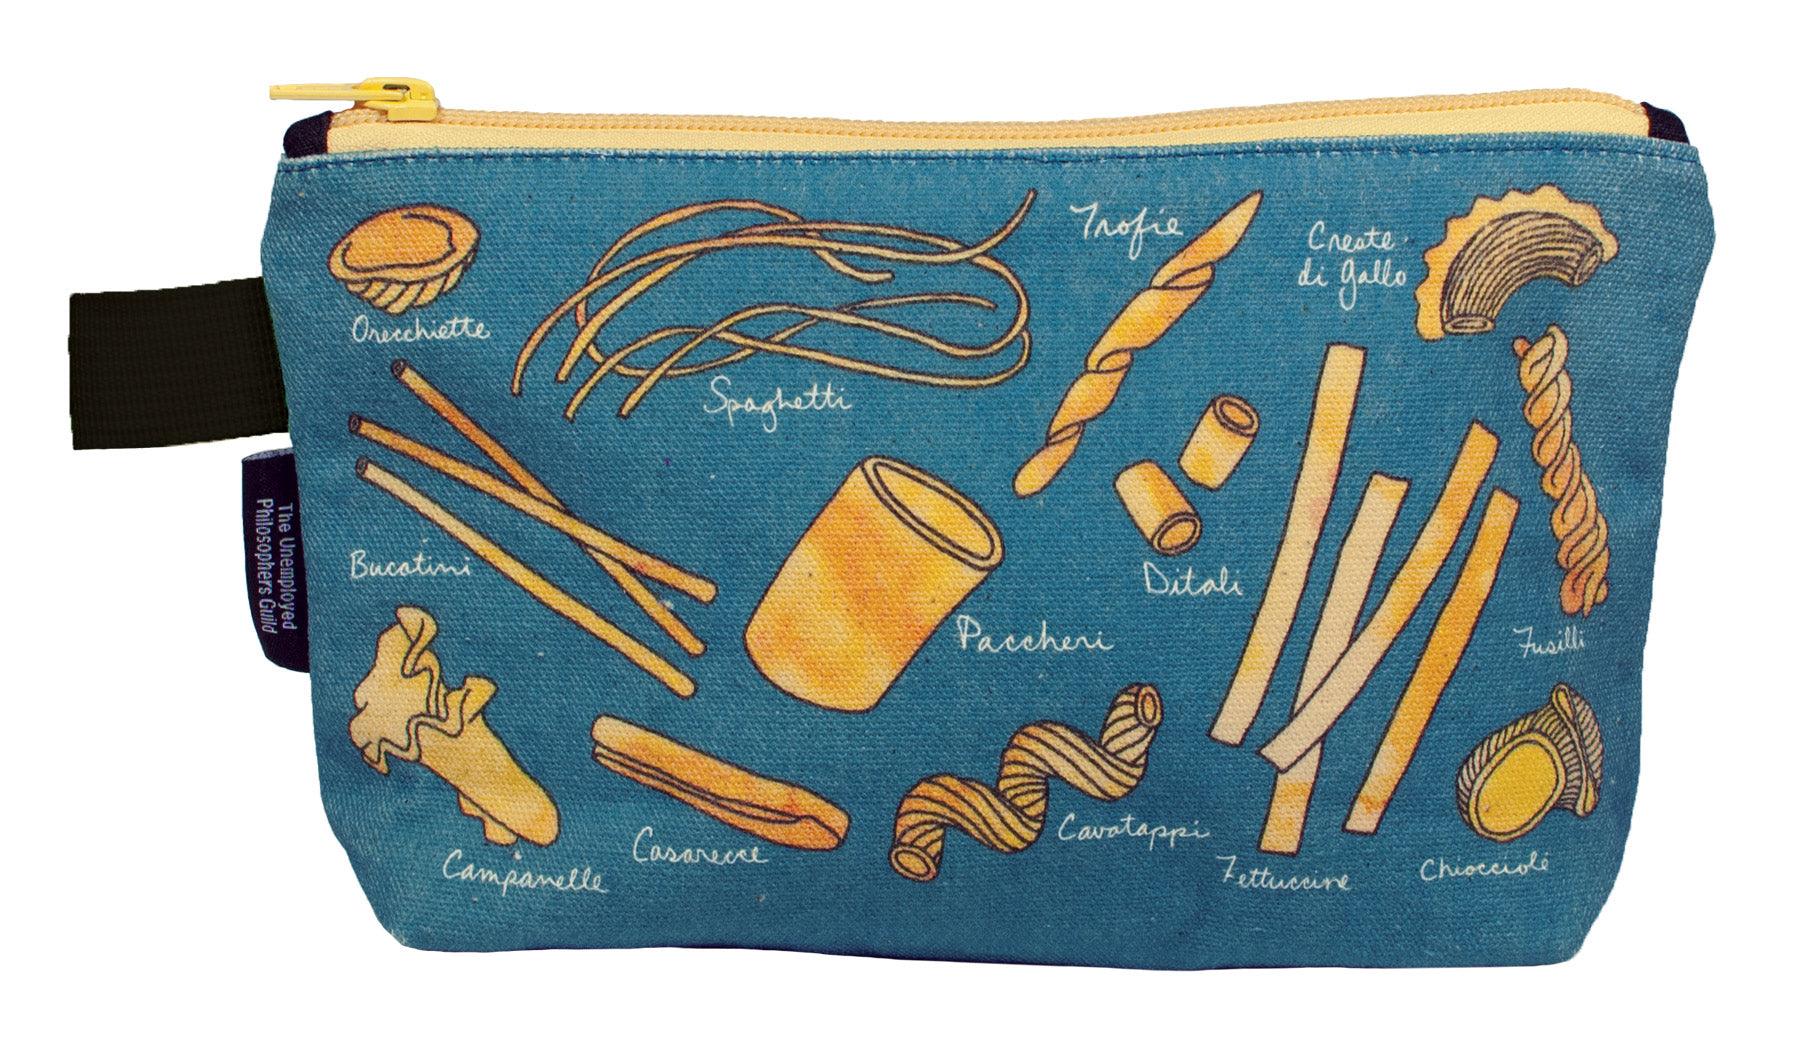 Product photo of Pasta Shapes Zipper Bag, a novelty gift manufactured by The Unemployed Philosophers Guild.